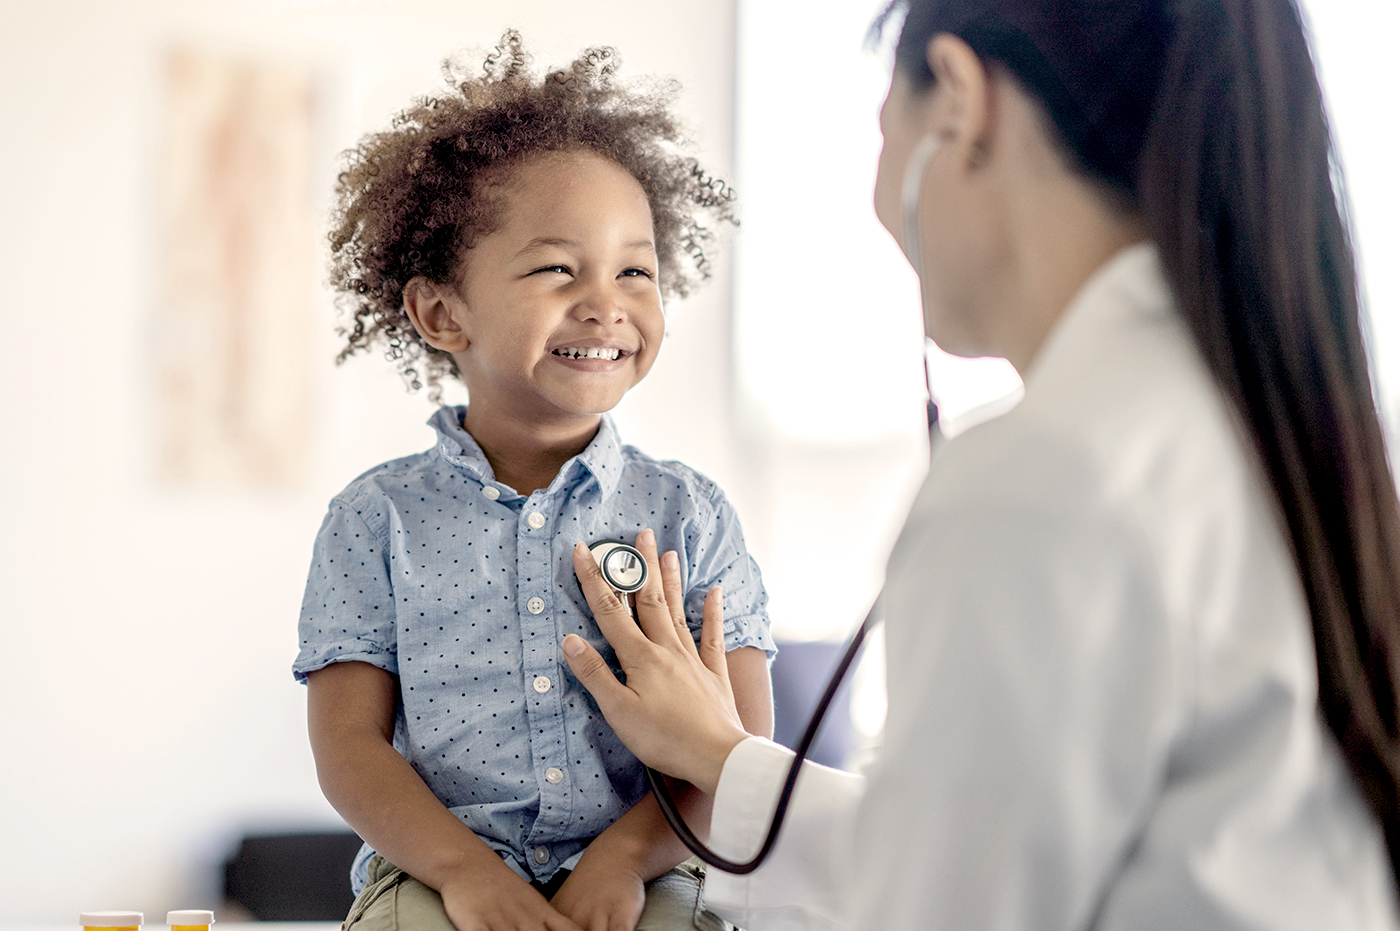 A doctor listening to a little boy's heartbeat using a stethoscope.